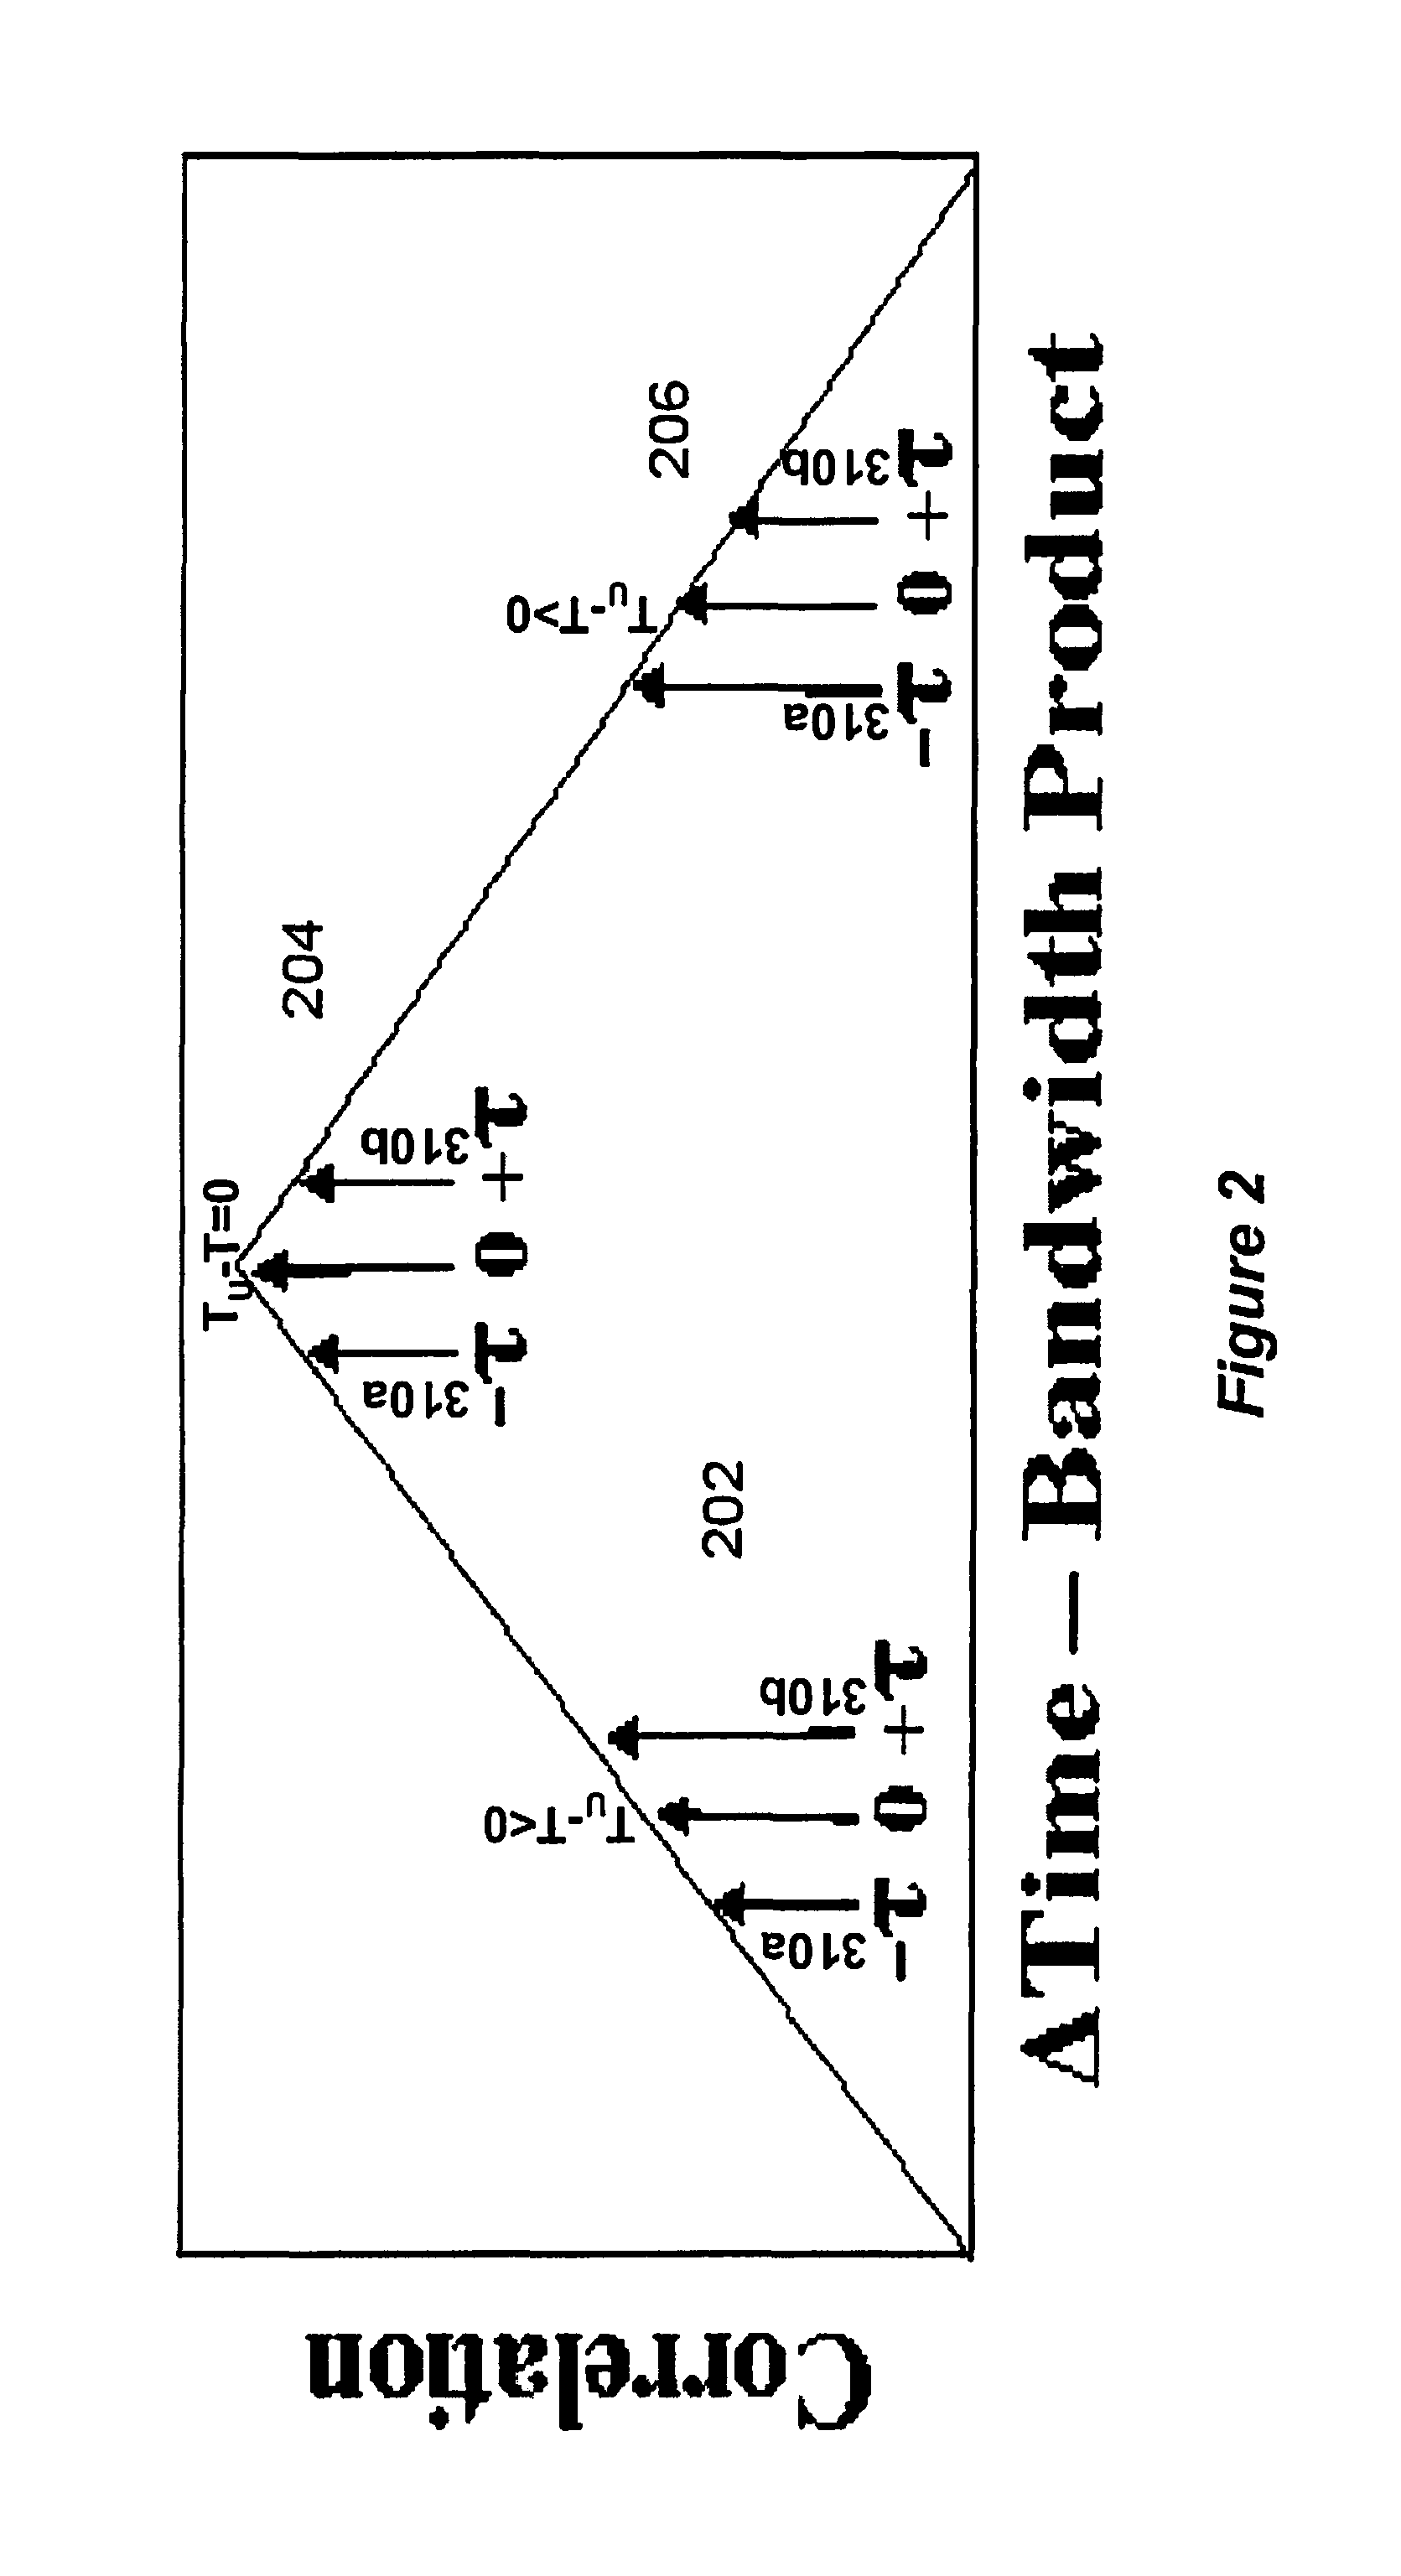 Control interval expansion of variable time delay control structure for channel matching